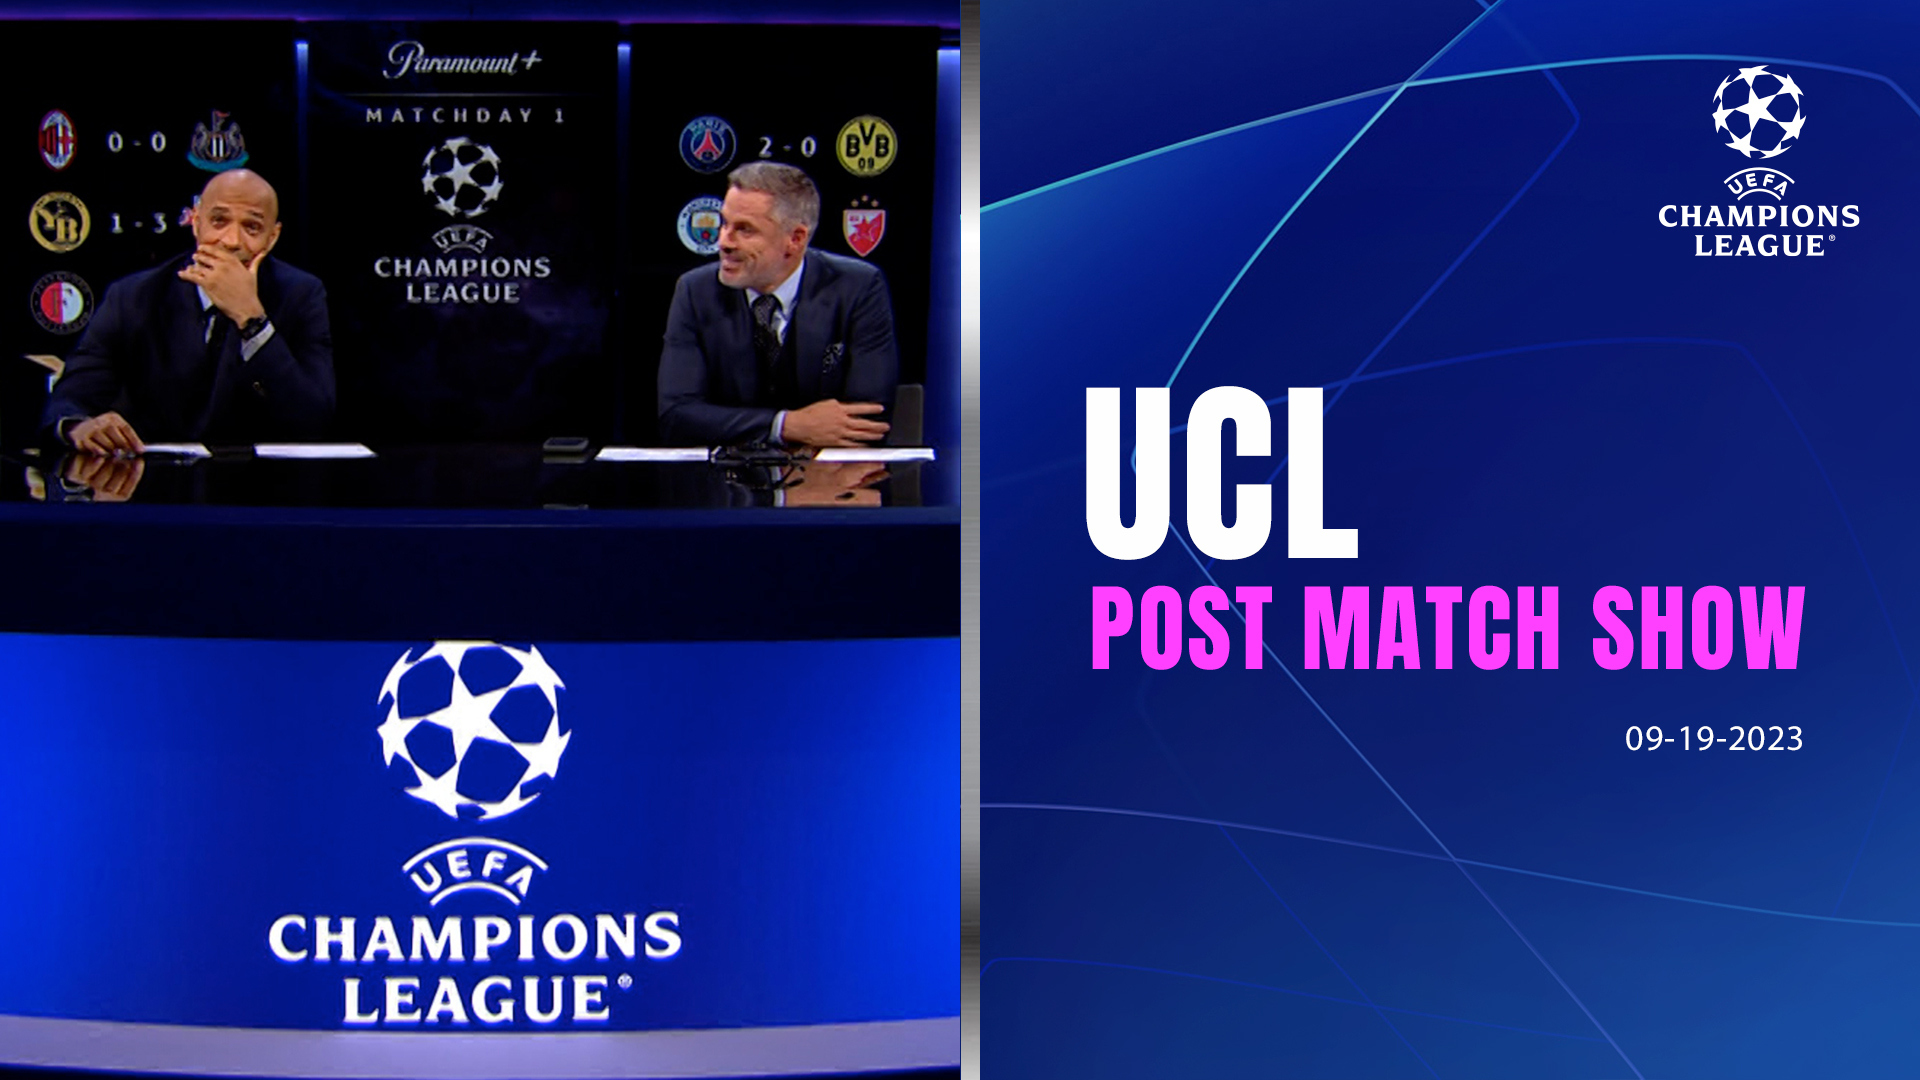 Paramount+ will stream the UEFA Champions League until 2030